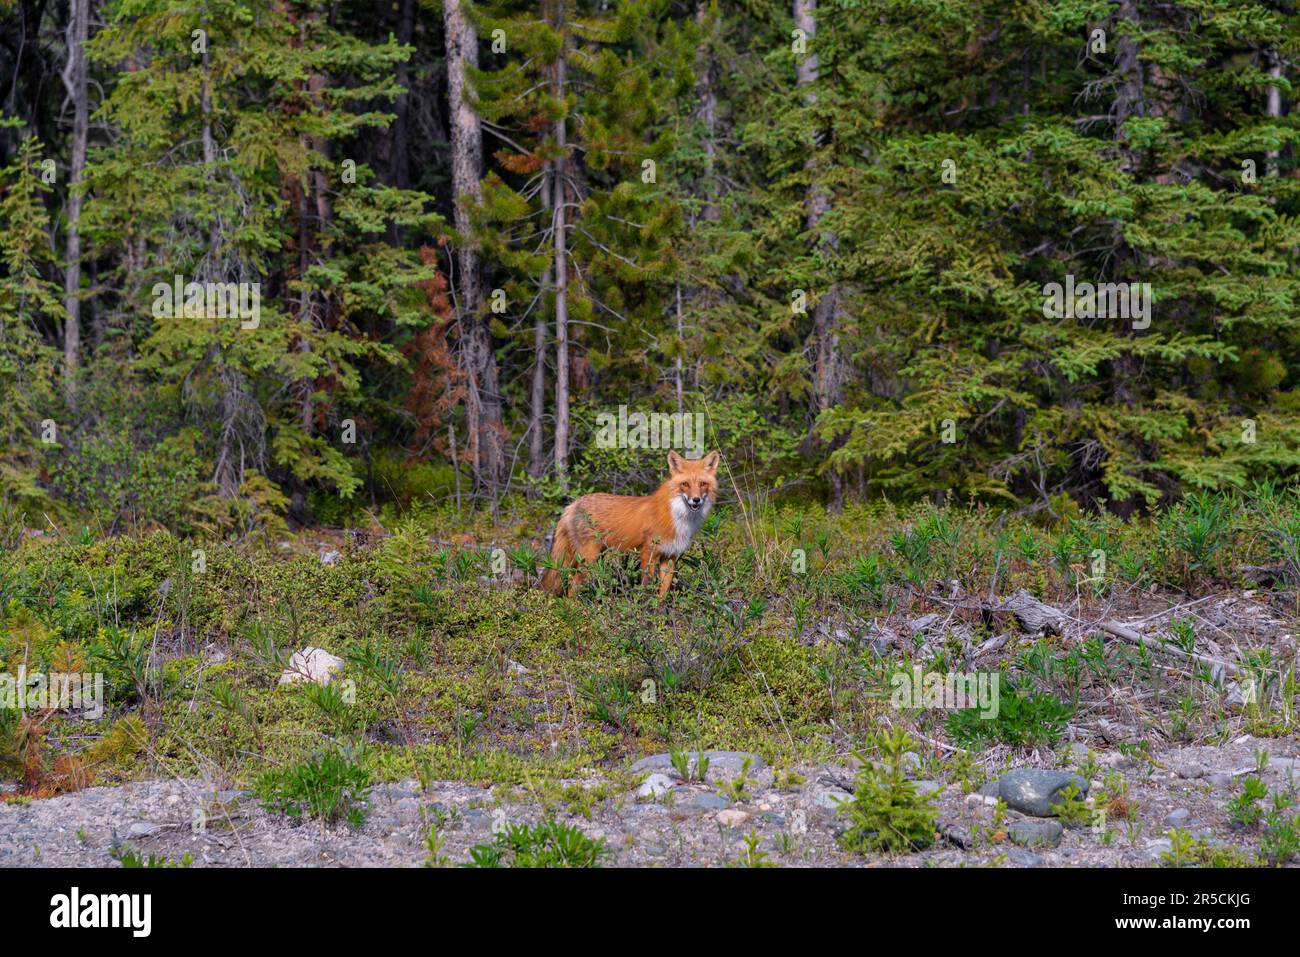 Wild red fox (Vulpes vulpes) seen in green meadow during summertime, looking towards camera outside of Whitehorse, Yukon Territory. Stock Photo